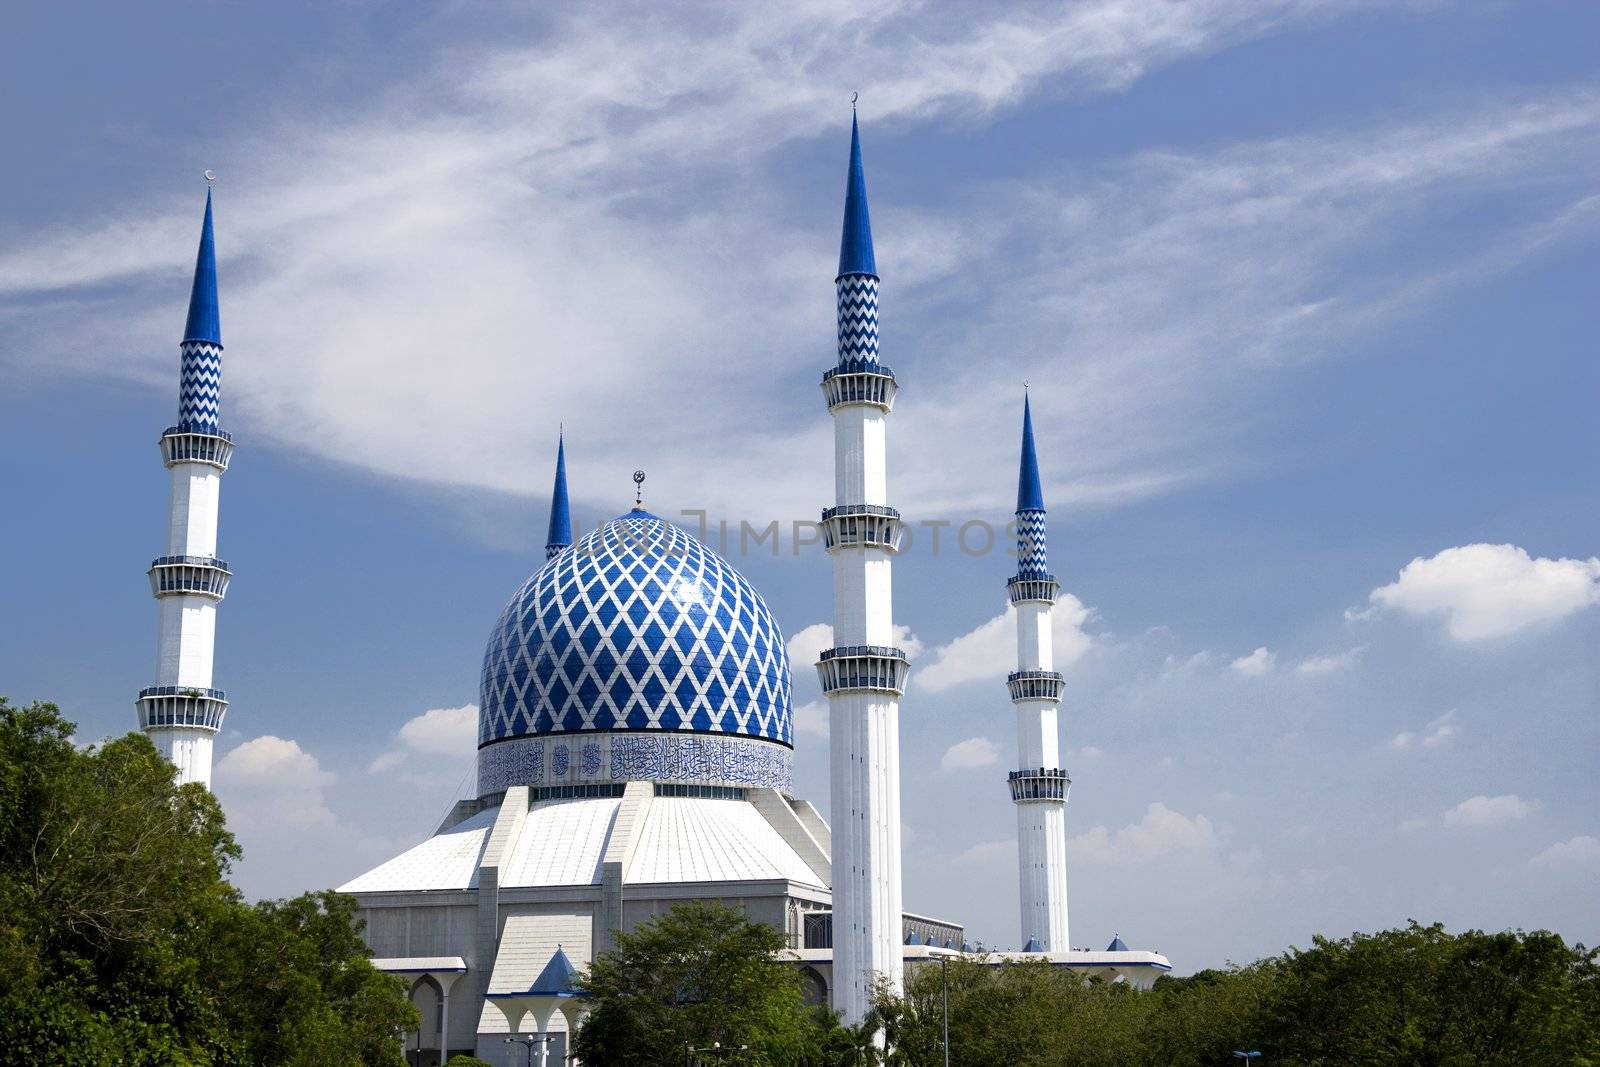 Sultan Salahuddin Abdul Aziz Shah Mosque or commonly known as the Blue Mosque, located at Shah Alam, Selangor, Malaysia.